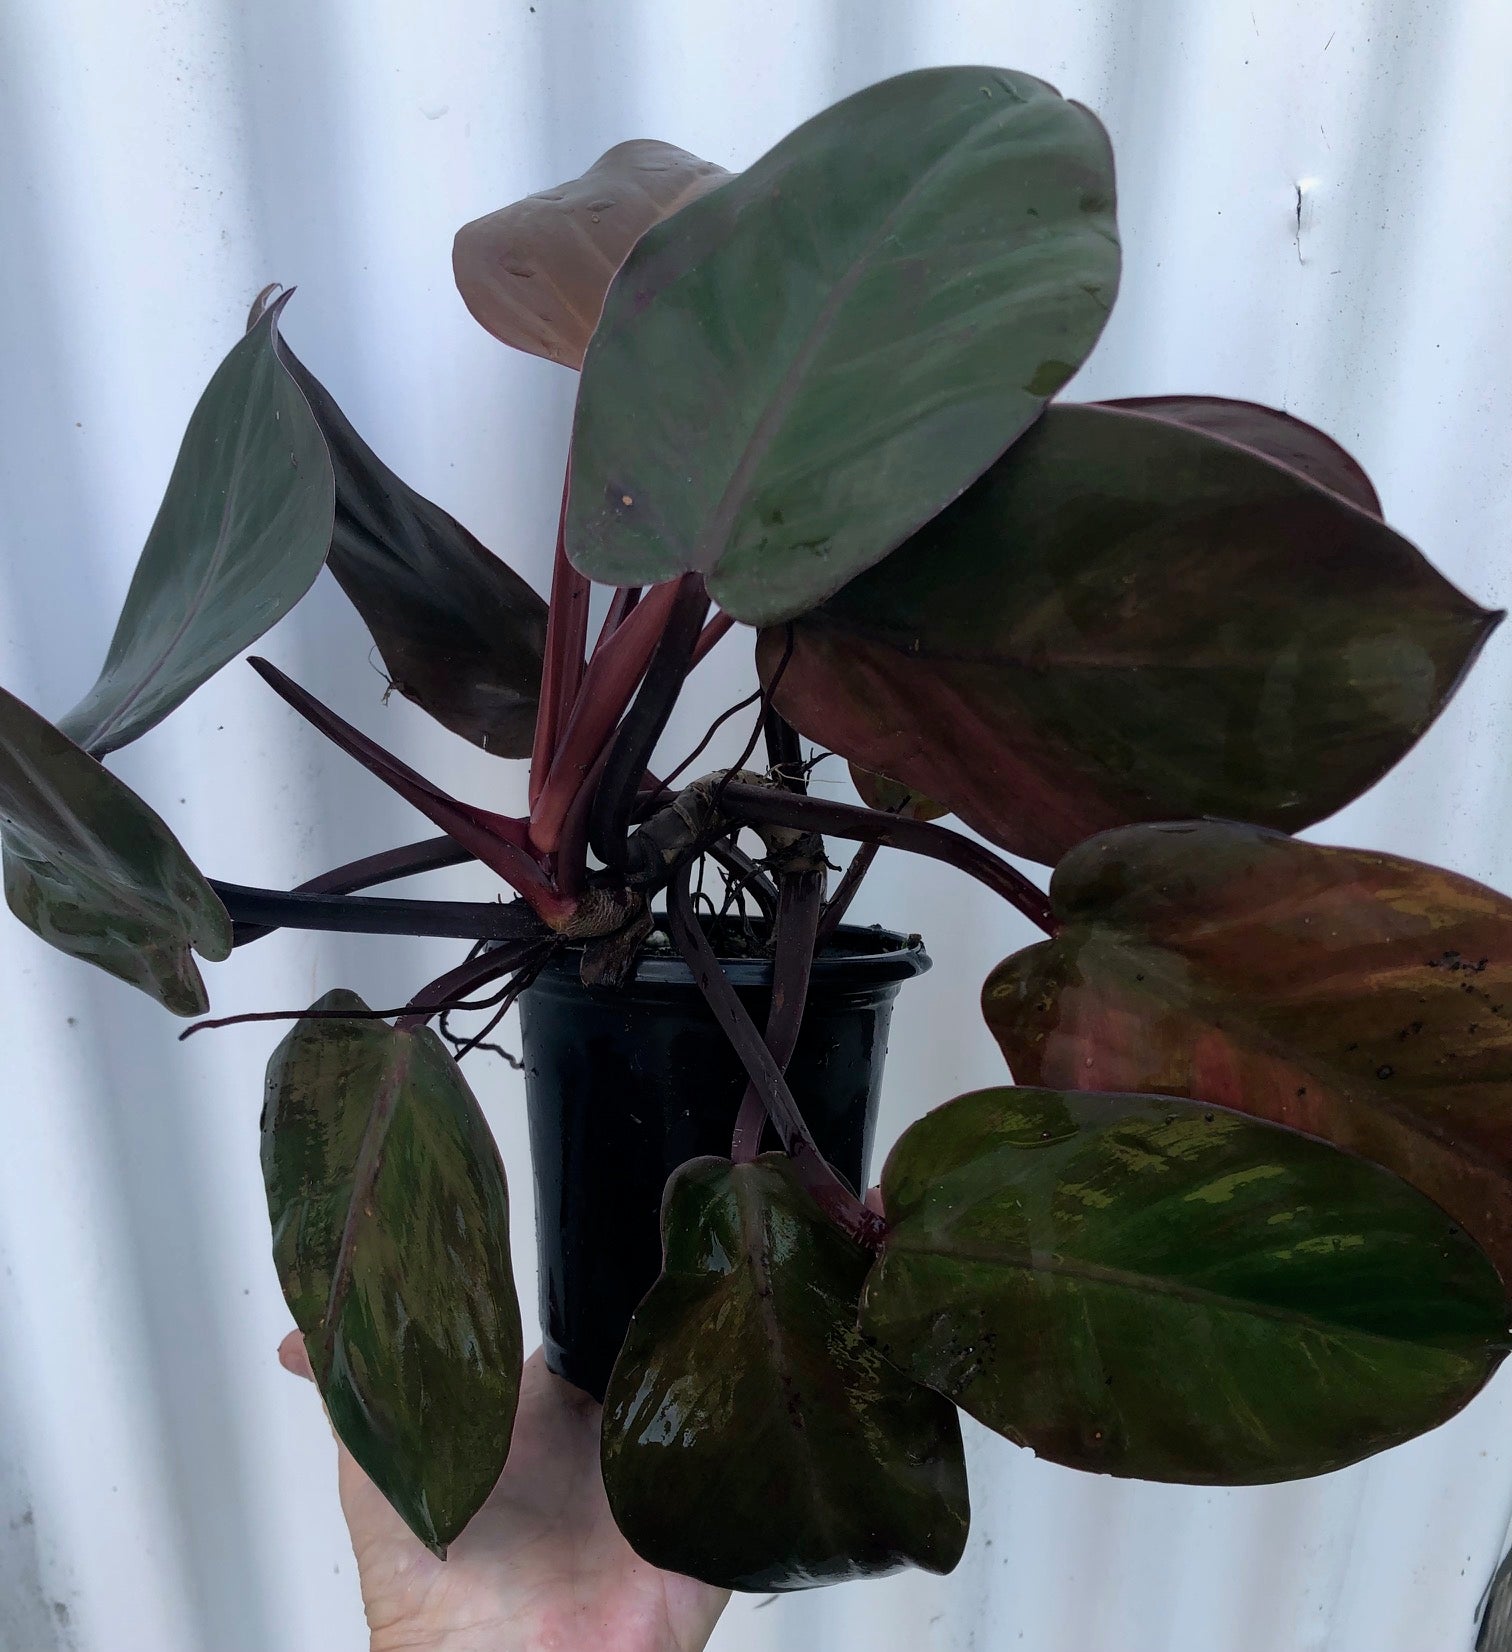 Philodendron 'McColley's Finale'